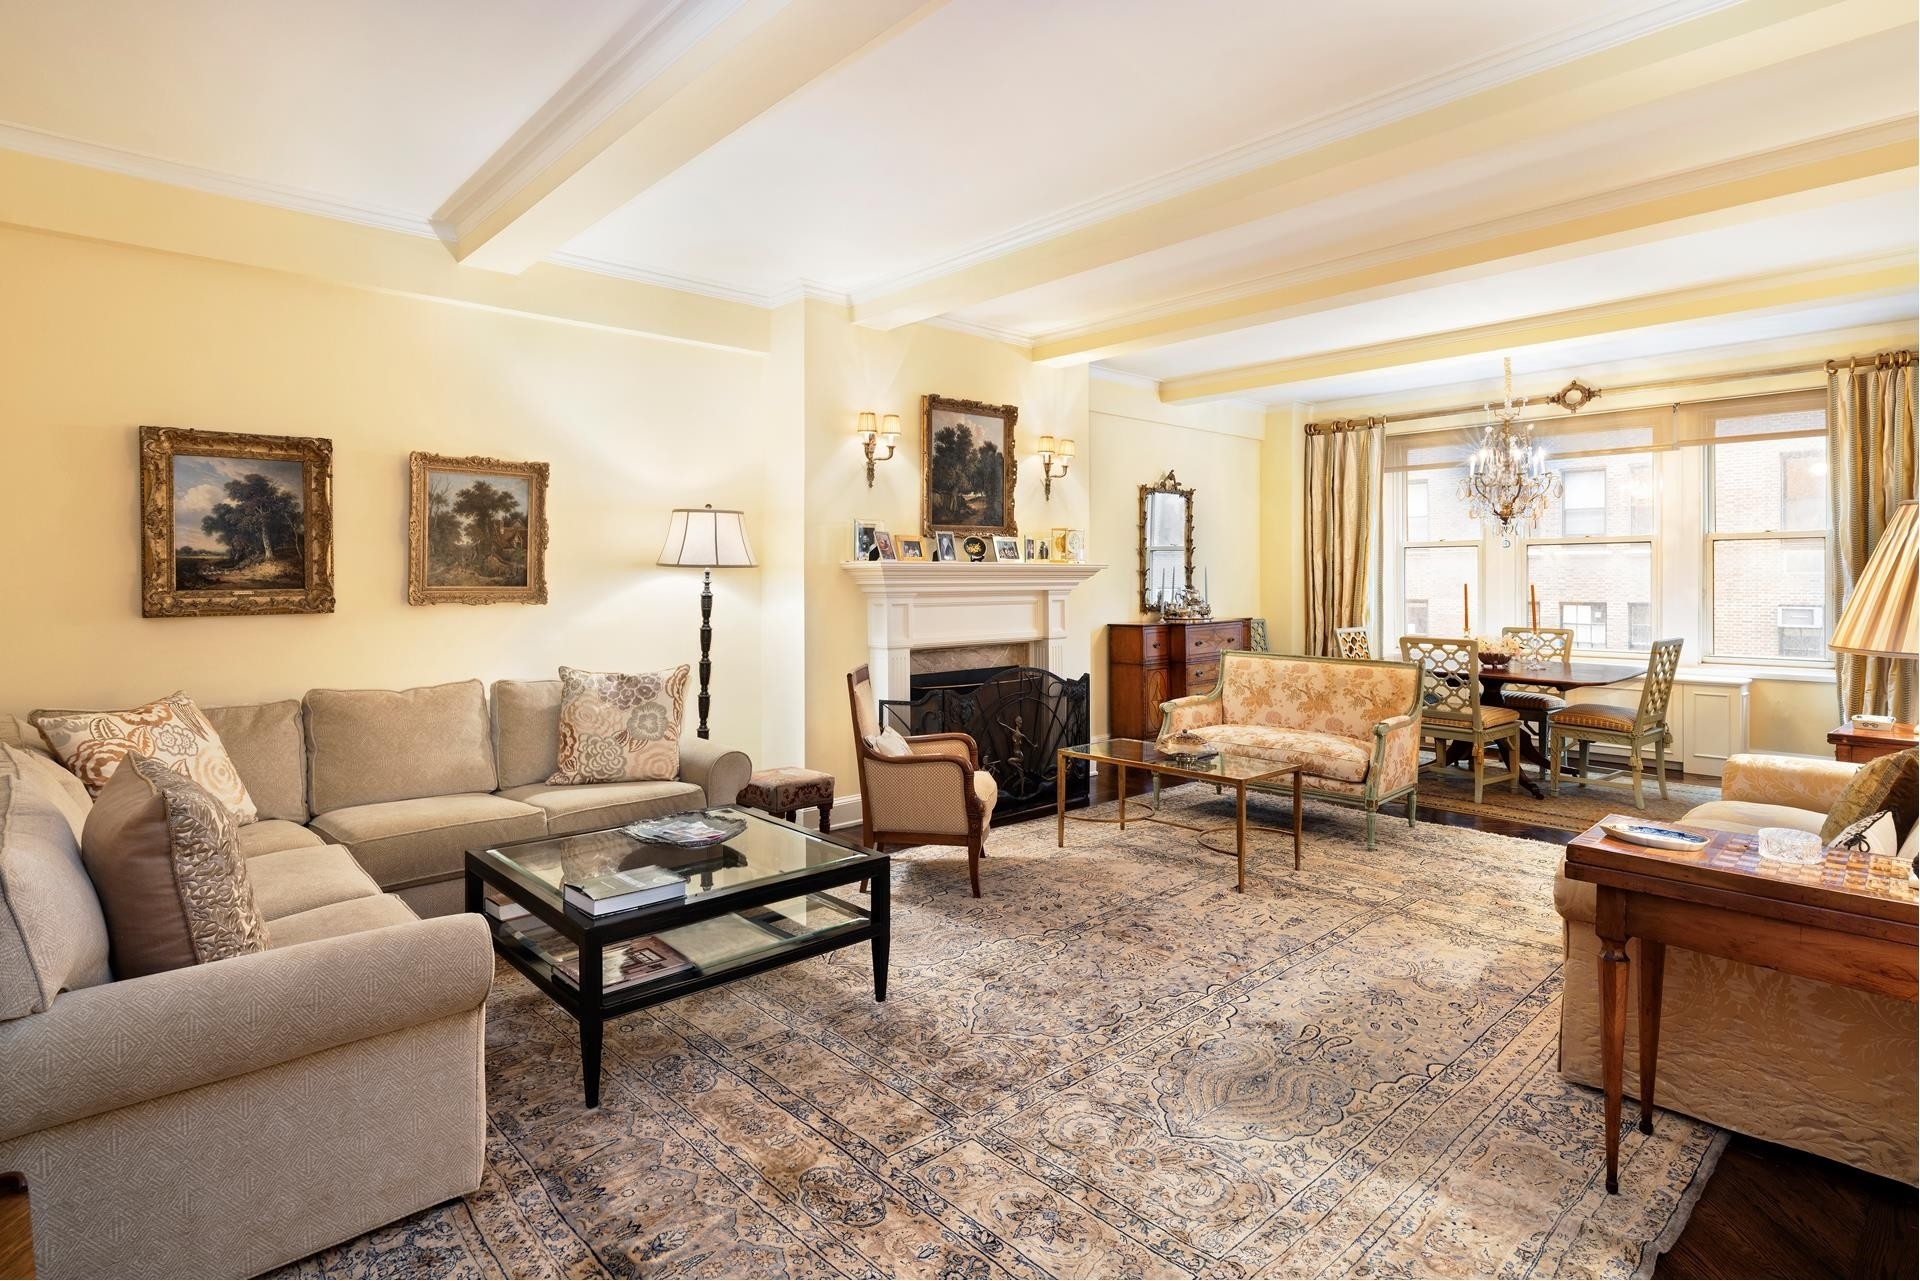 Co-op Properties for Sale at 1120 PARK AVE, 7C Carnegie Hill, New York, New York 10128